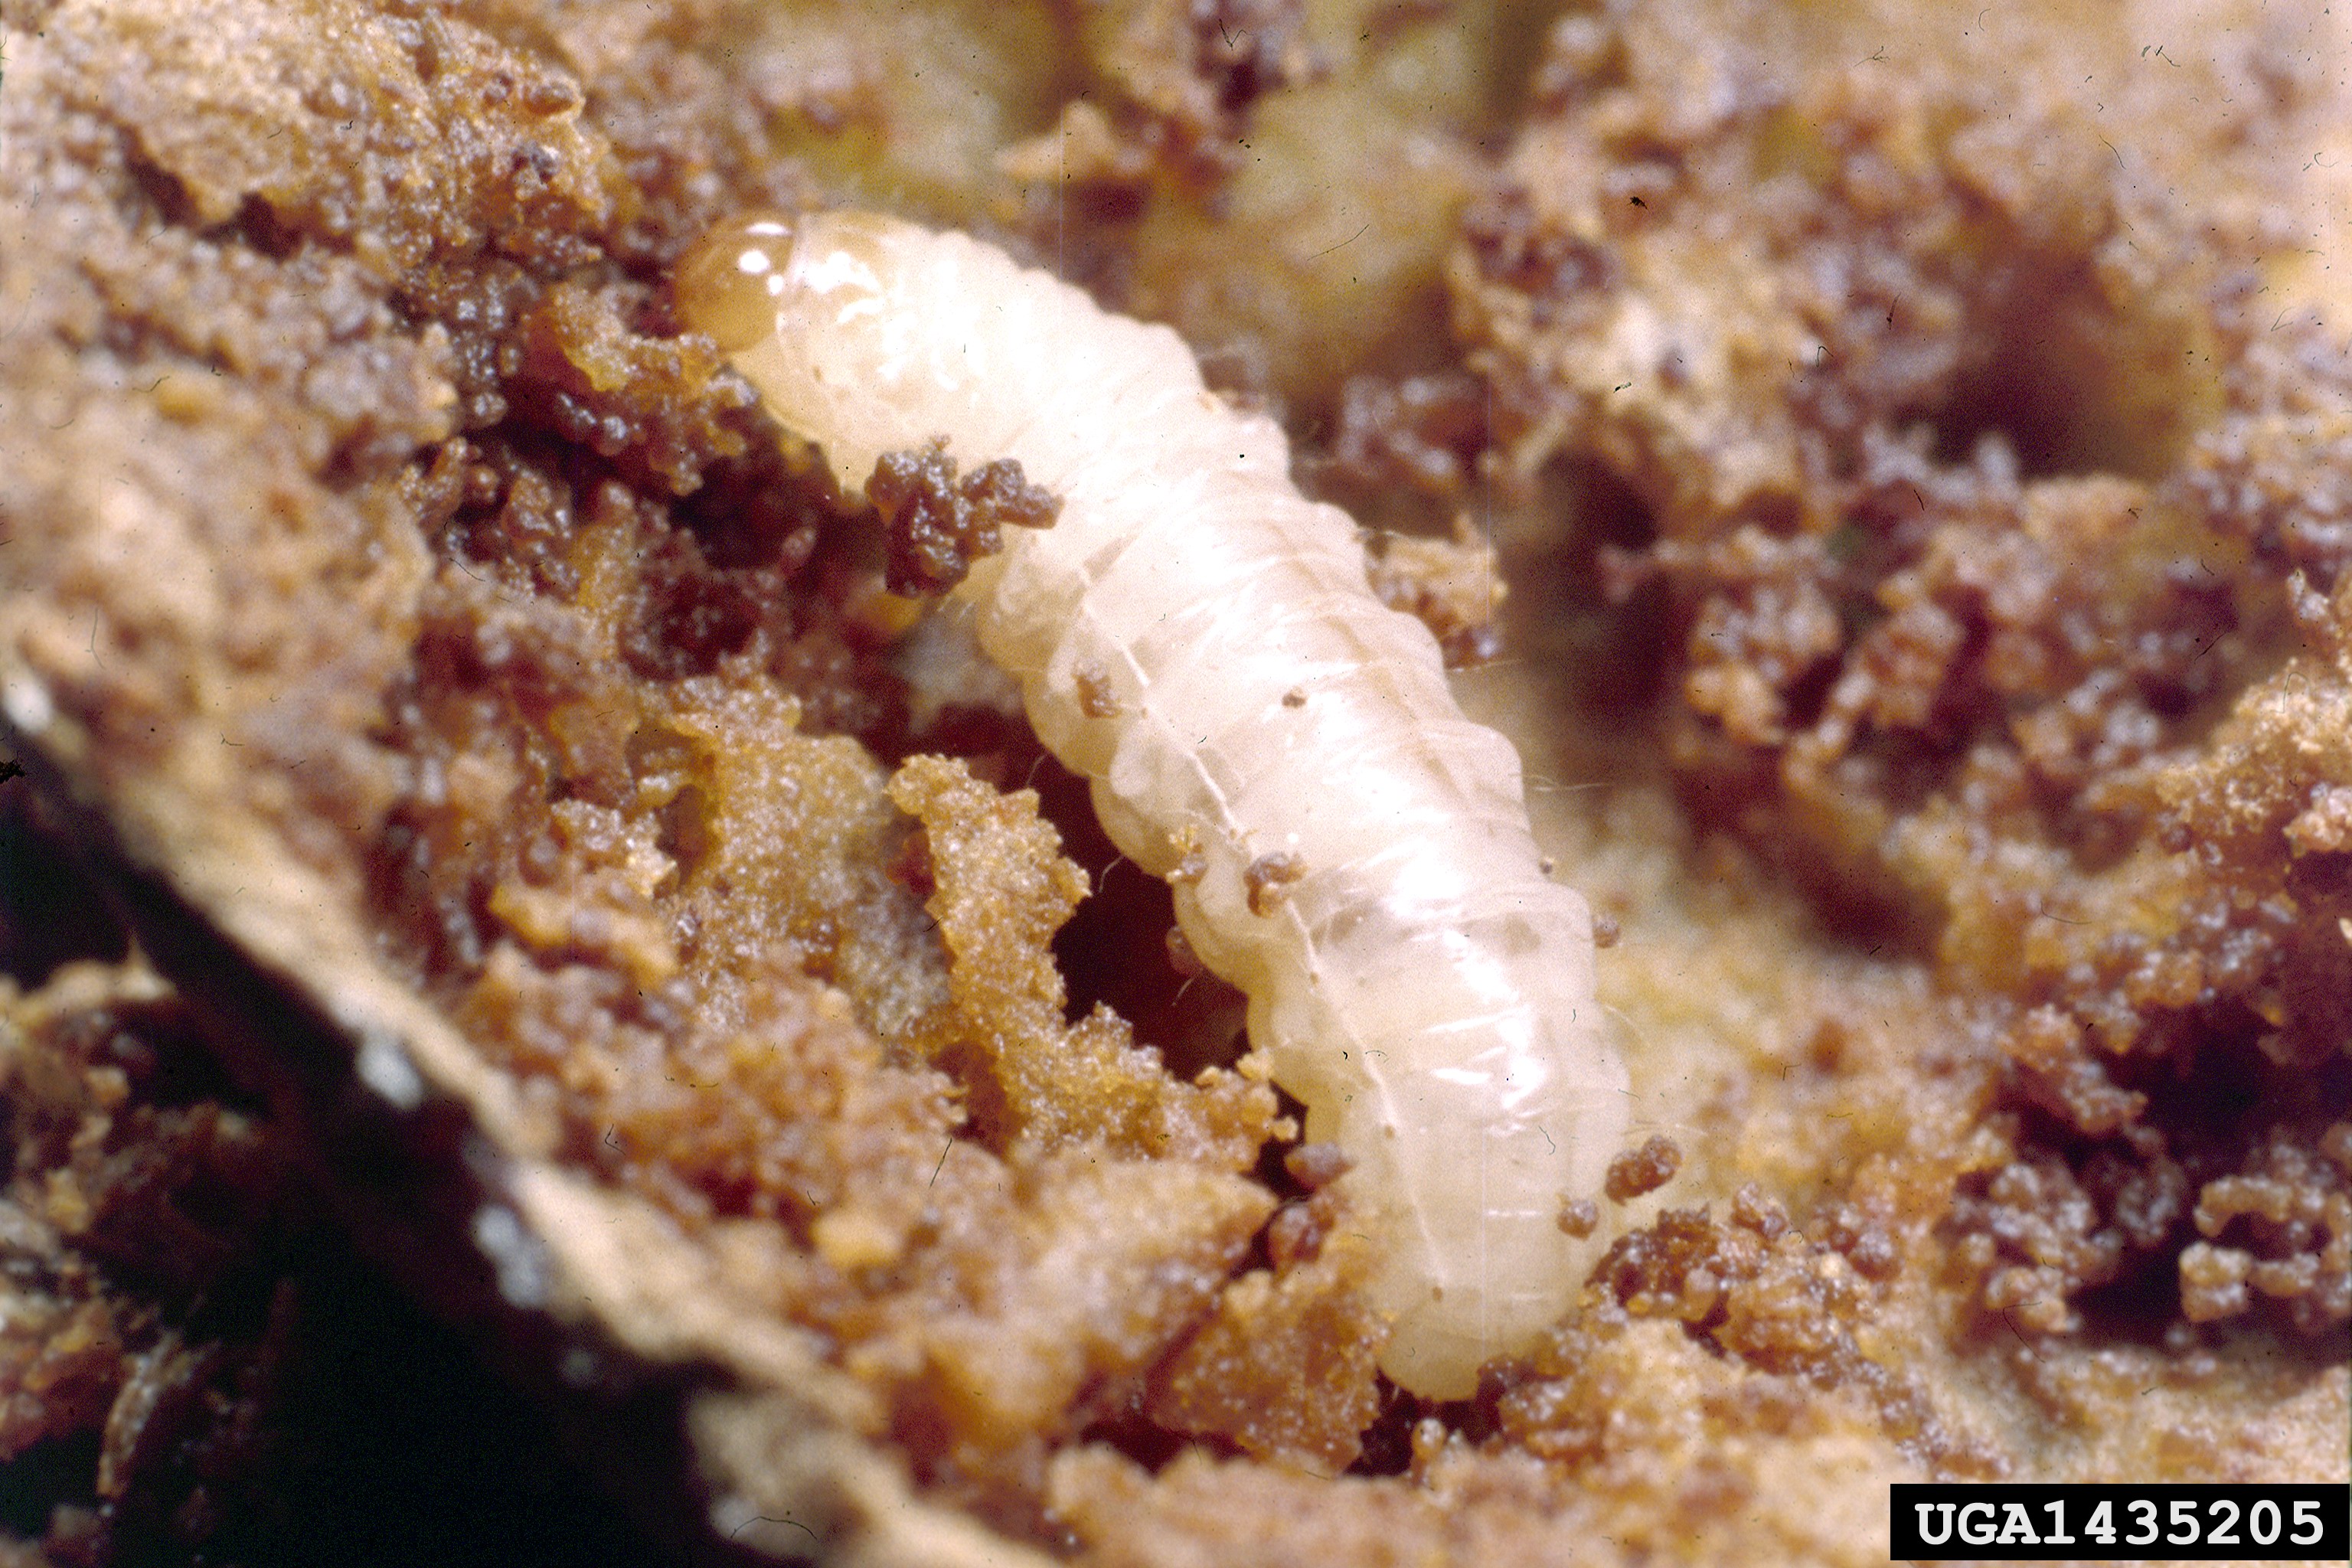 Yellowish white larva with a brown head, in brown mush